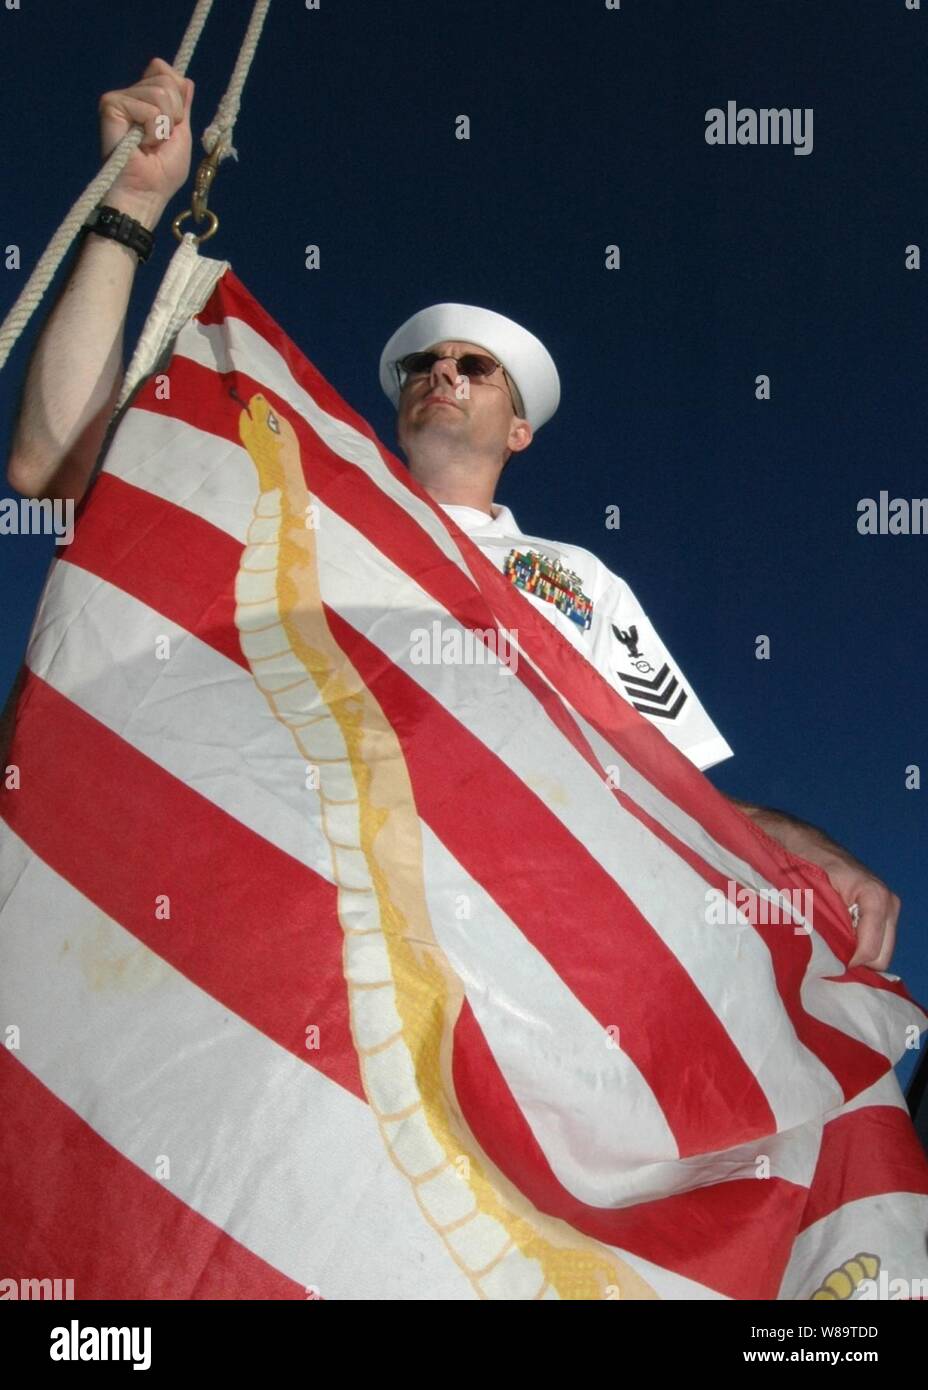 U.S. Navy Petty Officer 1st Class Stephen Cornell prepares to raise the Navy Jack onboard the USS Rueben James (FFG 57) during morning colors in Pearl Harbor, Hawaii, on Aug. 31, 2006.  The temporary substitution for the Union Jack represents an historic reminder of the nation's and Navy's origin and will to persevere and triumph during the war on terror. Stock Photo